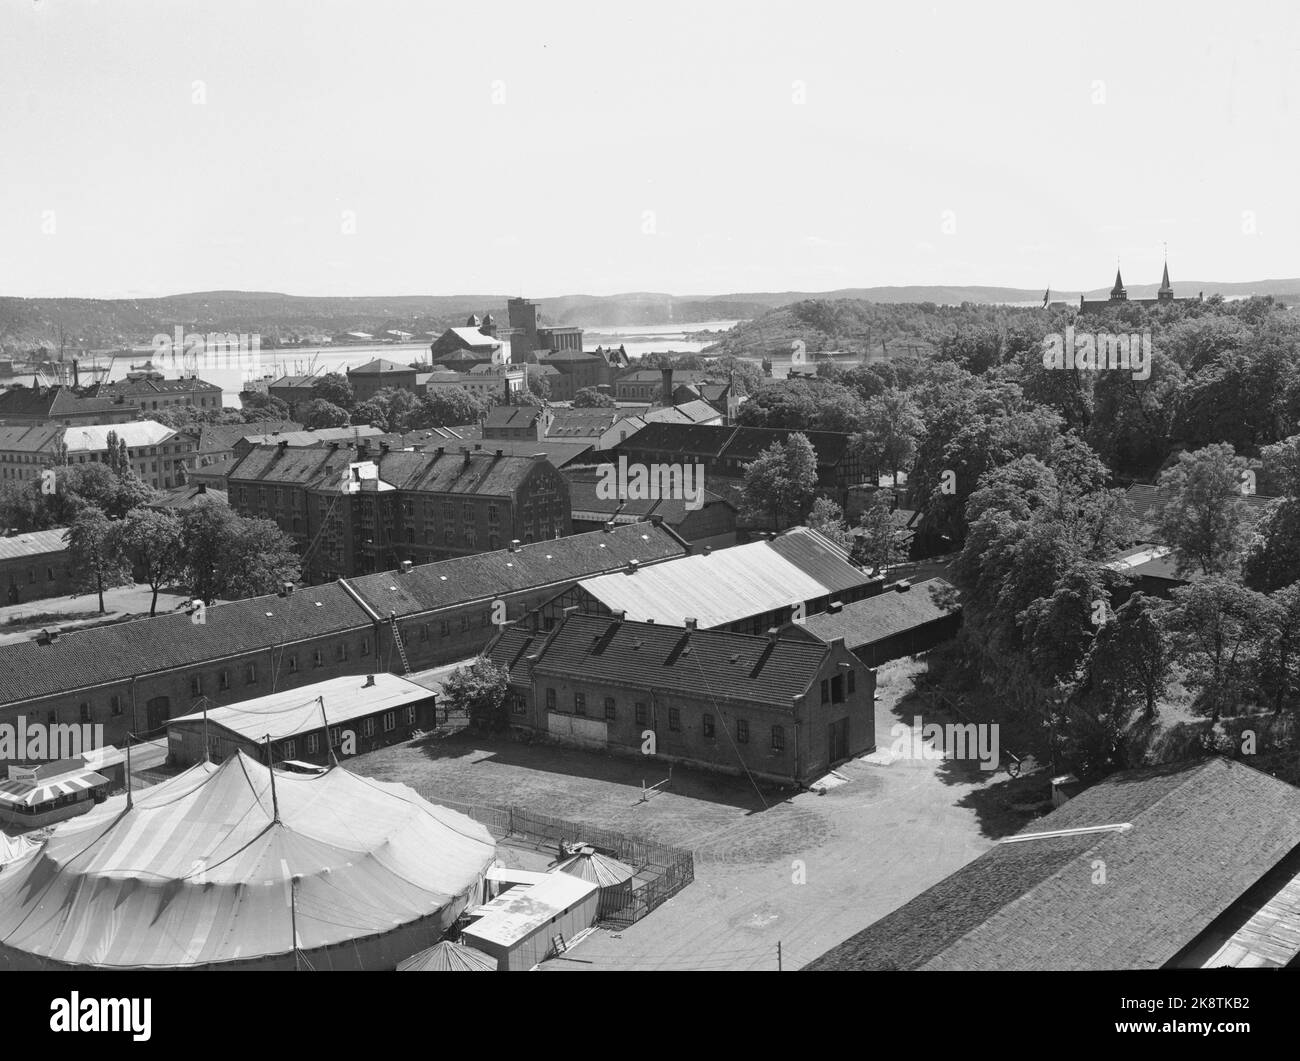 Oslo. 19490715. Motor taken from the roof of the Norwegian Shipowners' Association. Contrasked. Here you can see Akershus fortress with the entire military area. In the foreground a circus tent and in the background the silo on the Vippetangen with Ekebergåsen and Bäckelaget. Photo: NTB Stock Photo